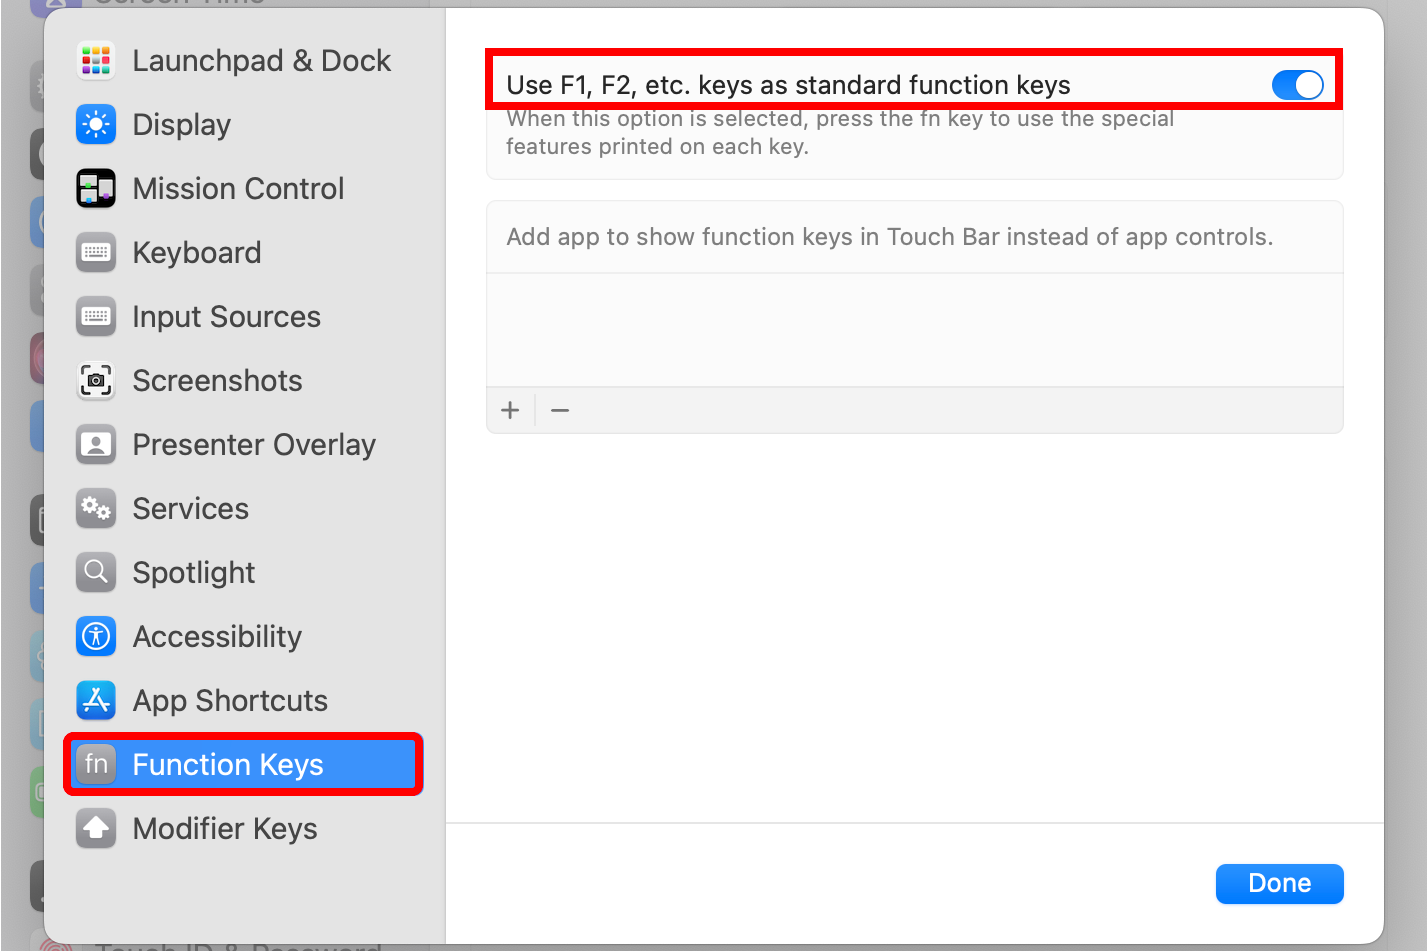 macOS System Settings with the option to use function keys as standard F1, F2, etc. keys enabled.